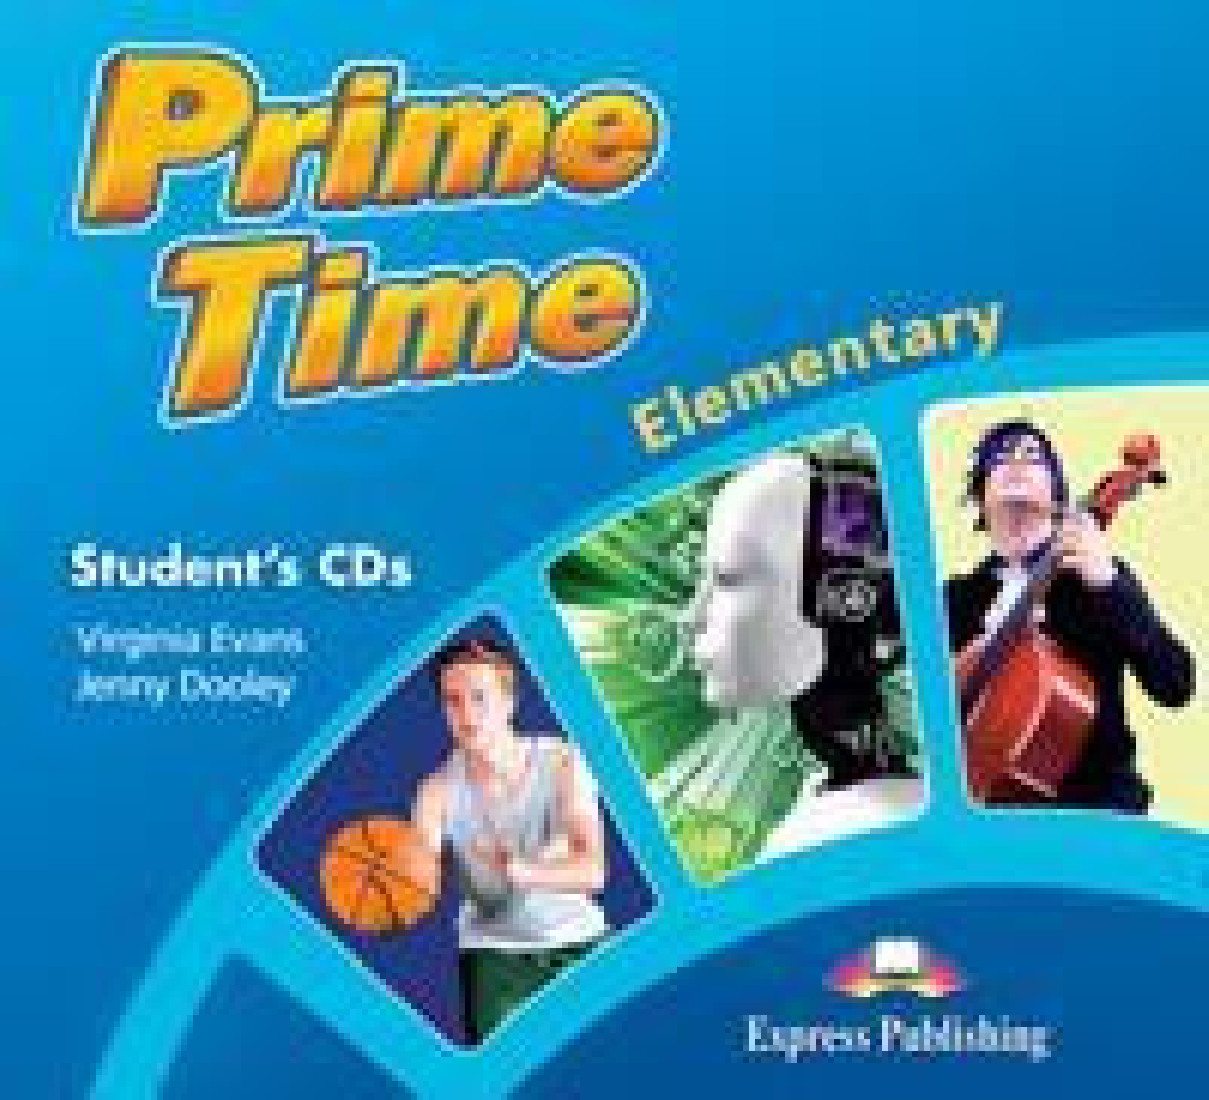 PRIME TIME ELEMENTARY STUDENTS CDs(2)